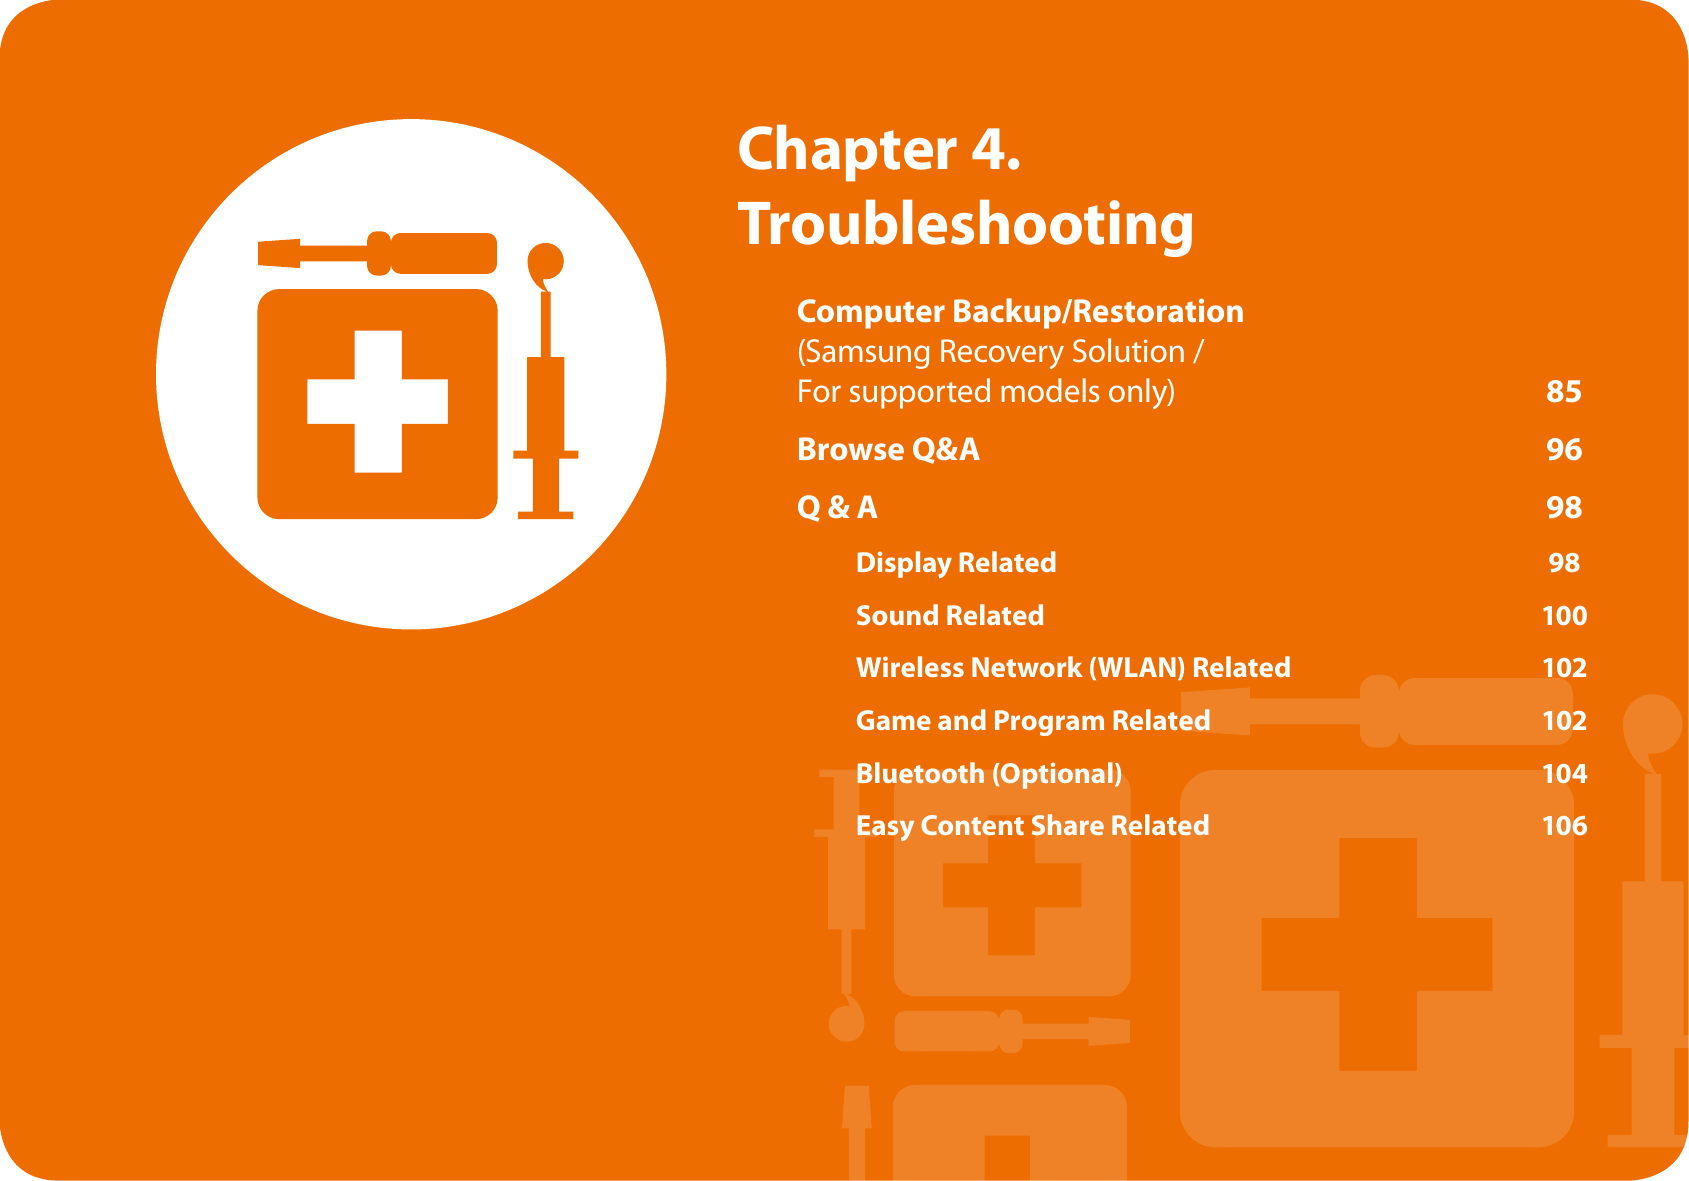 Chapter 4.  TroubleshootingComputer Backup/Restoration  (Samsung Recovery Solution /  For supported models only) 85Browse Q&amp;A  96Q &amp; A  98Display Related  98Sound Related  100Wireless Network (WLAN) Related  102Game and Program Related  102Bluetooth (Optional)  104Easy Content Share Related  106